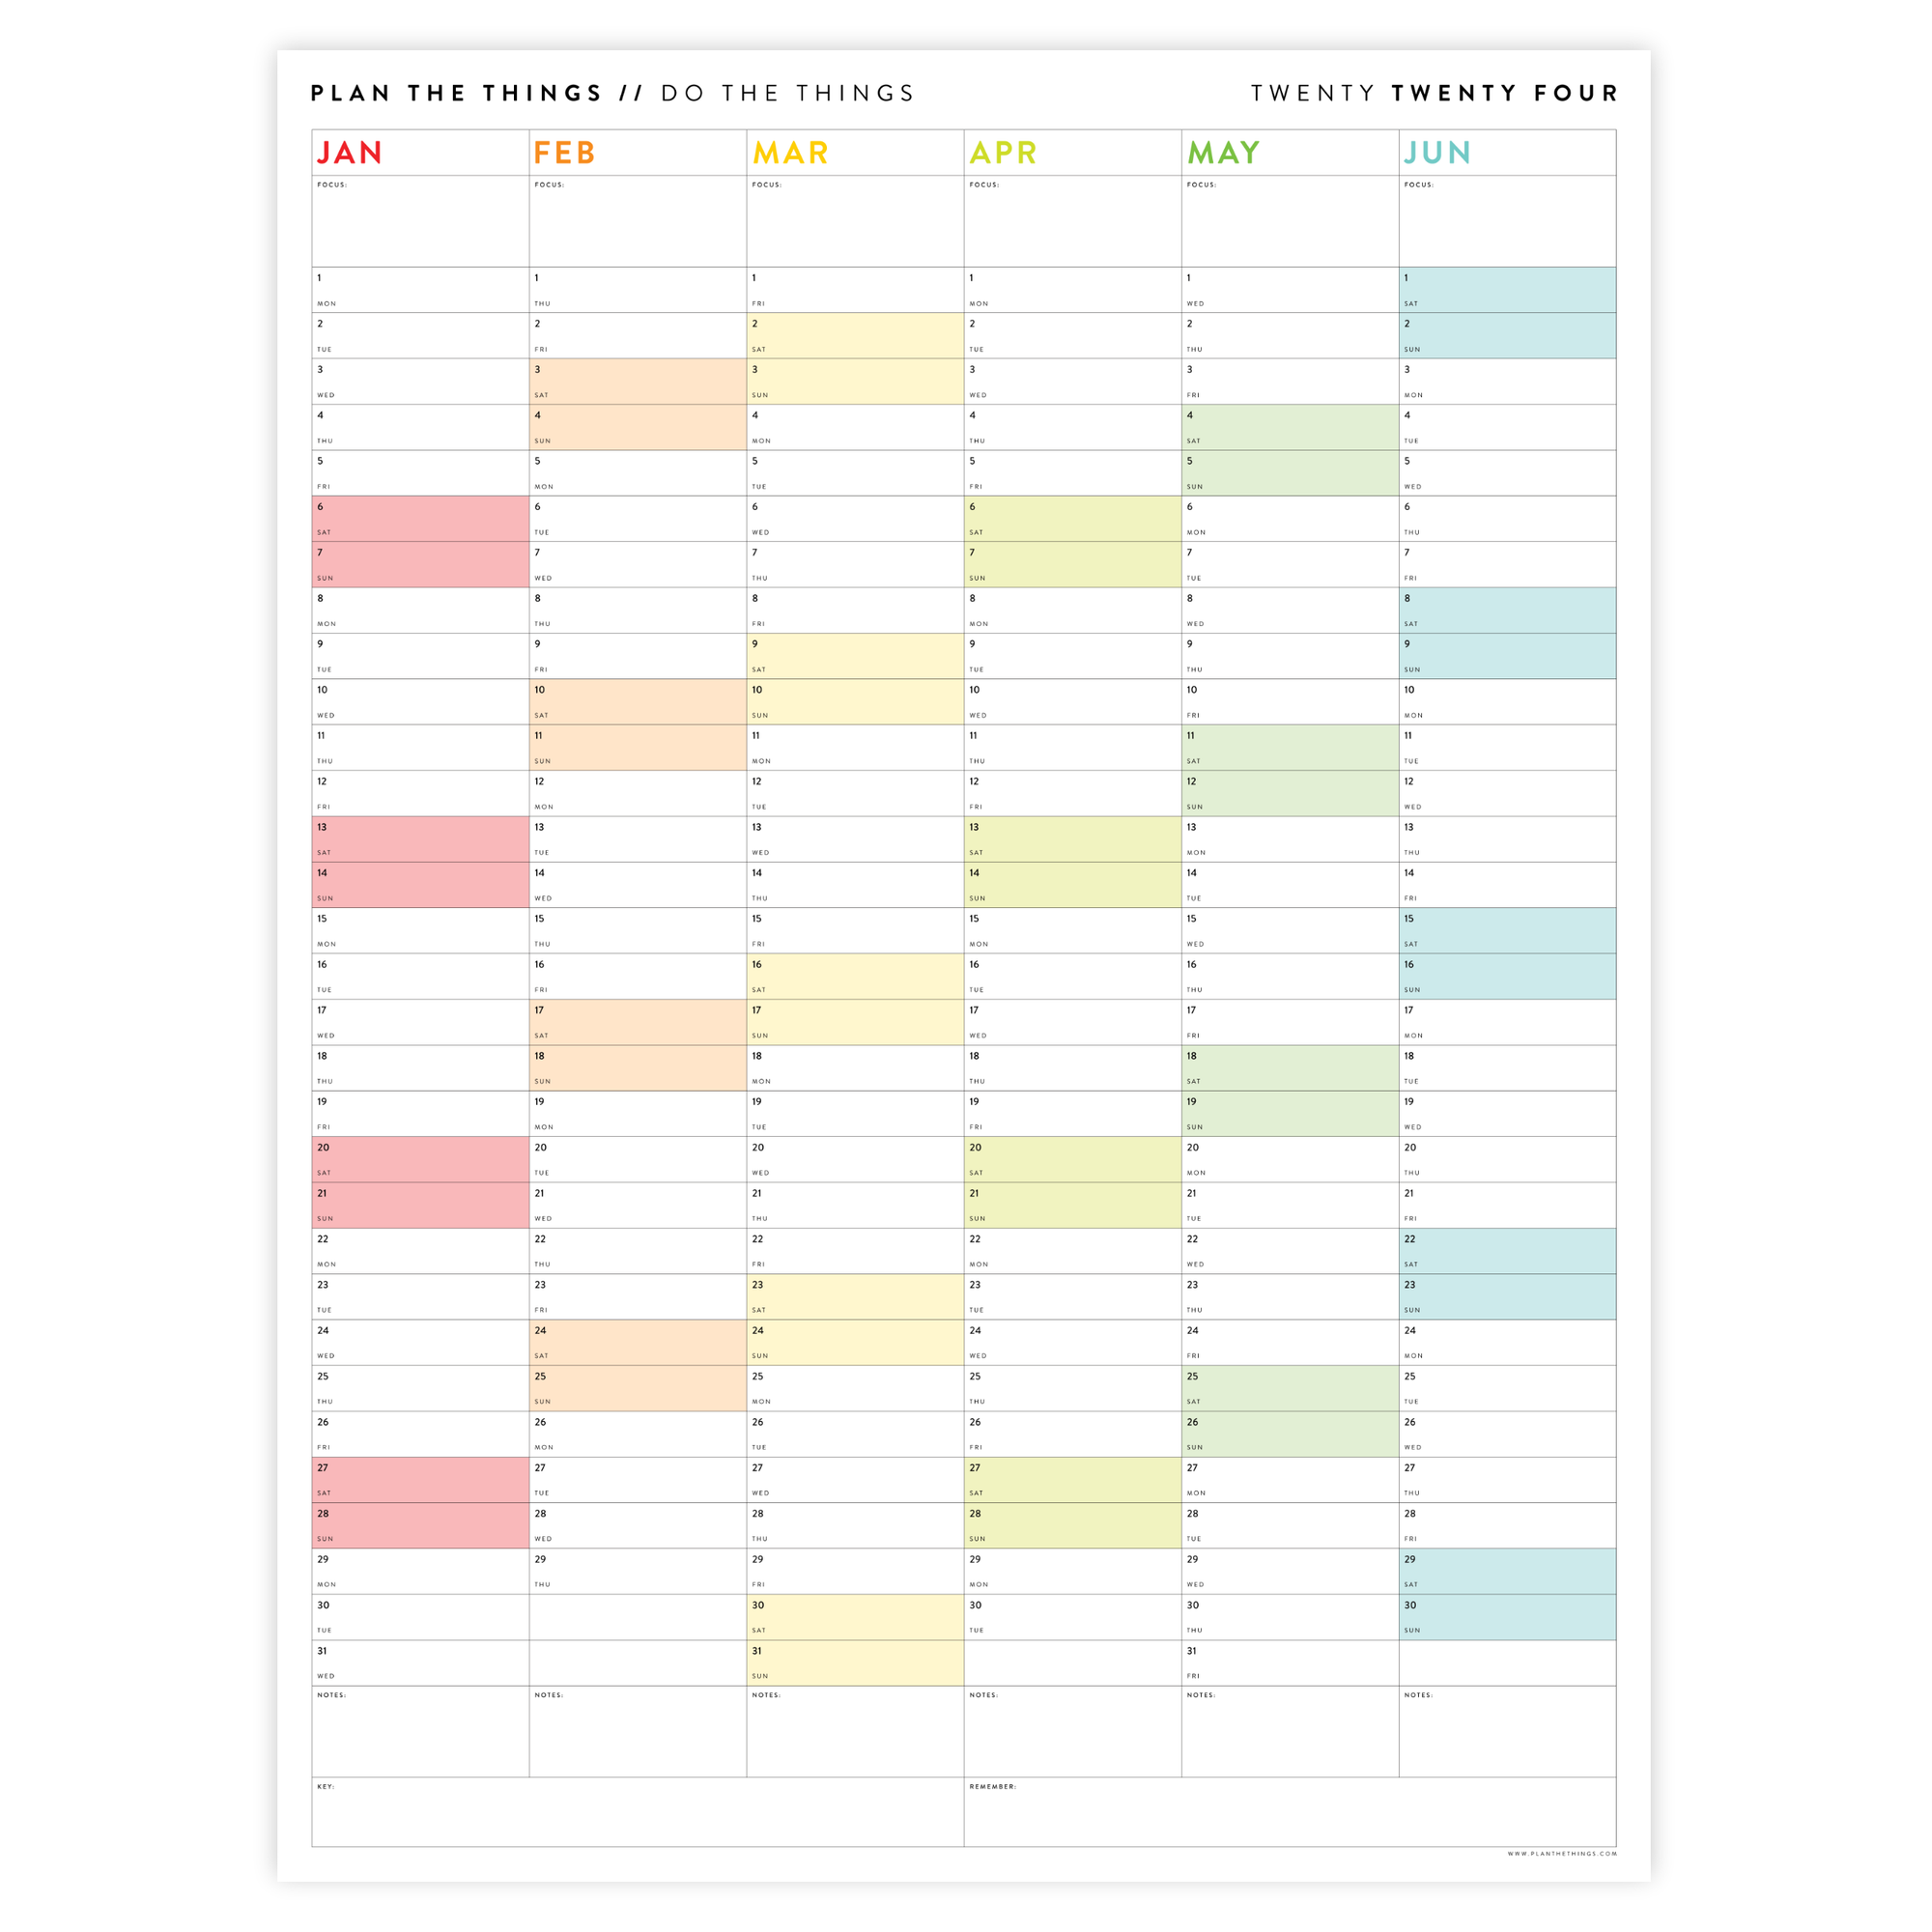 PRINTABLE SIX MONTH 2024 WALL CALENDAR SET WITH RAINBOW WEEKENDS - INSTANT DOWNLOAD